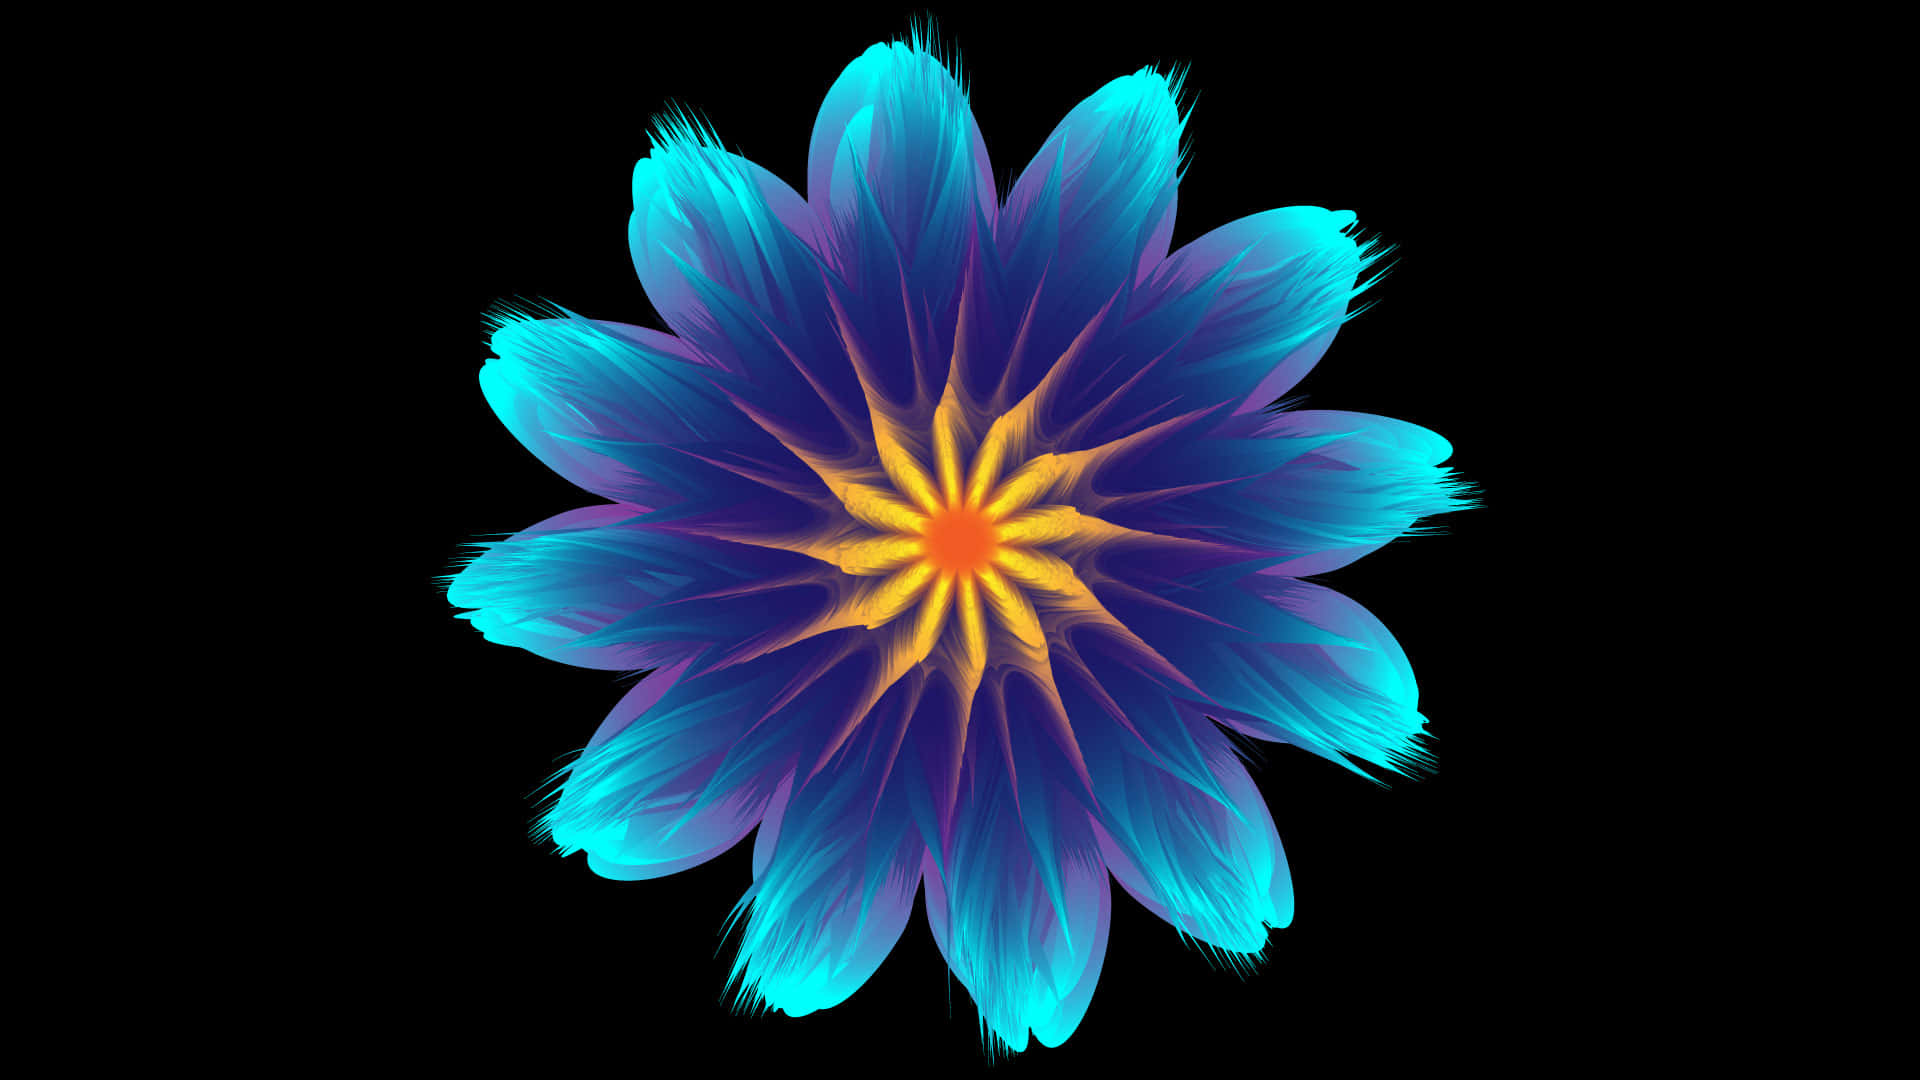 A Blue Flower With Yellow And Orange Petals Wallpaper